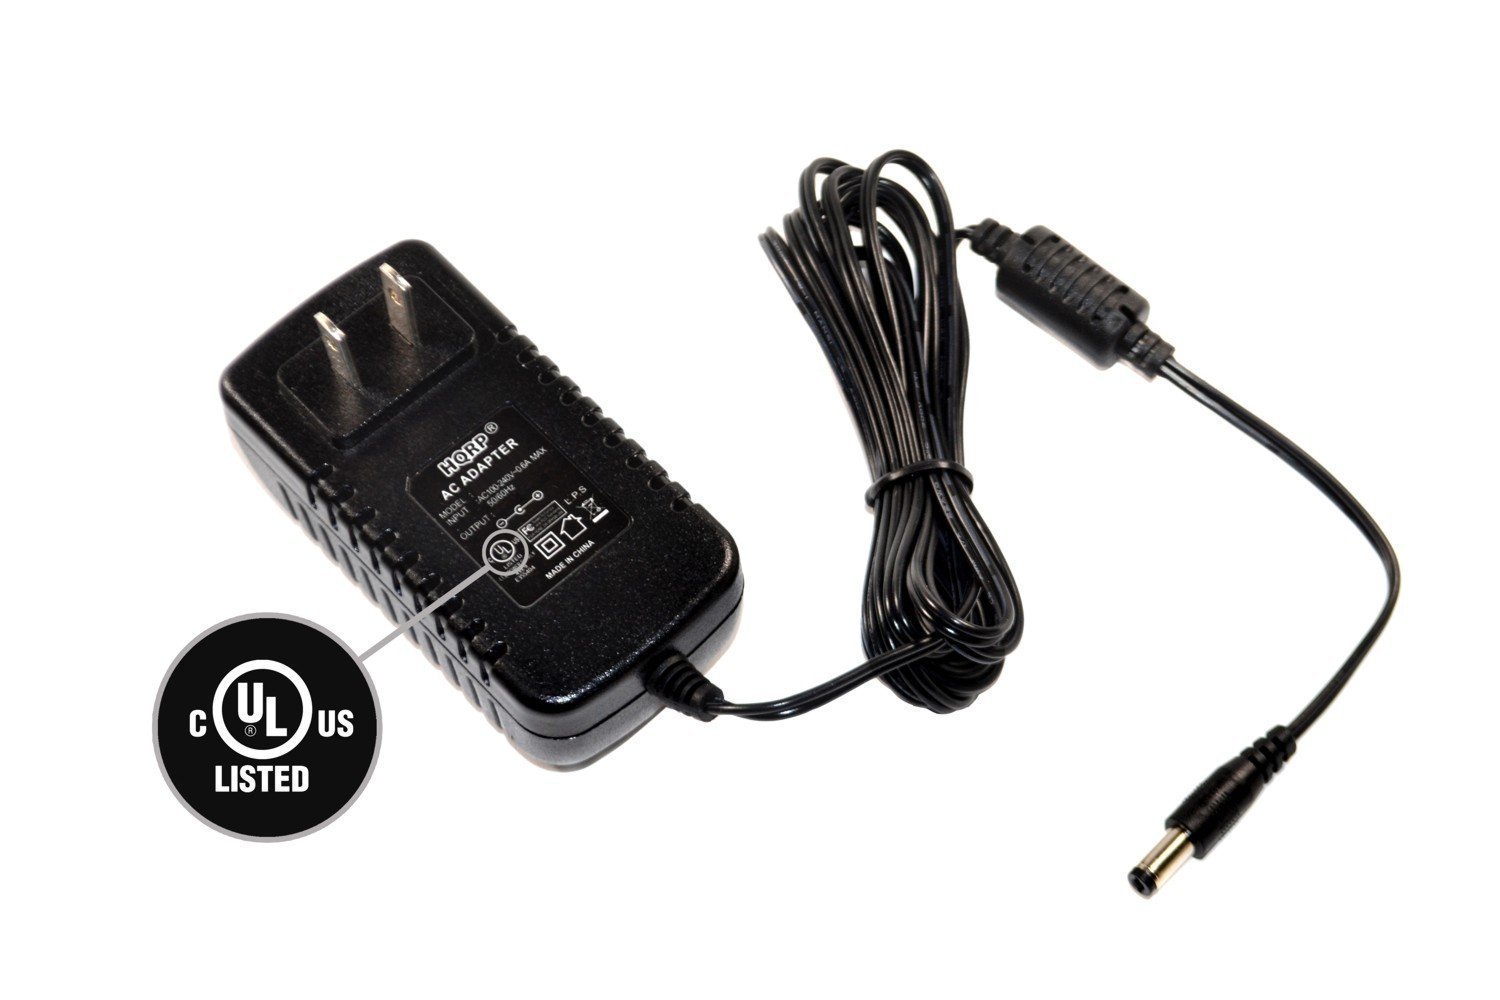 HQRP AC Adapter for Pro-Form XP440R BIKE EXERCISER 831219522 831219523 831219524 831219526 831219527 Power Supply Cord UL Listed